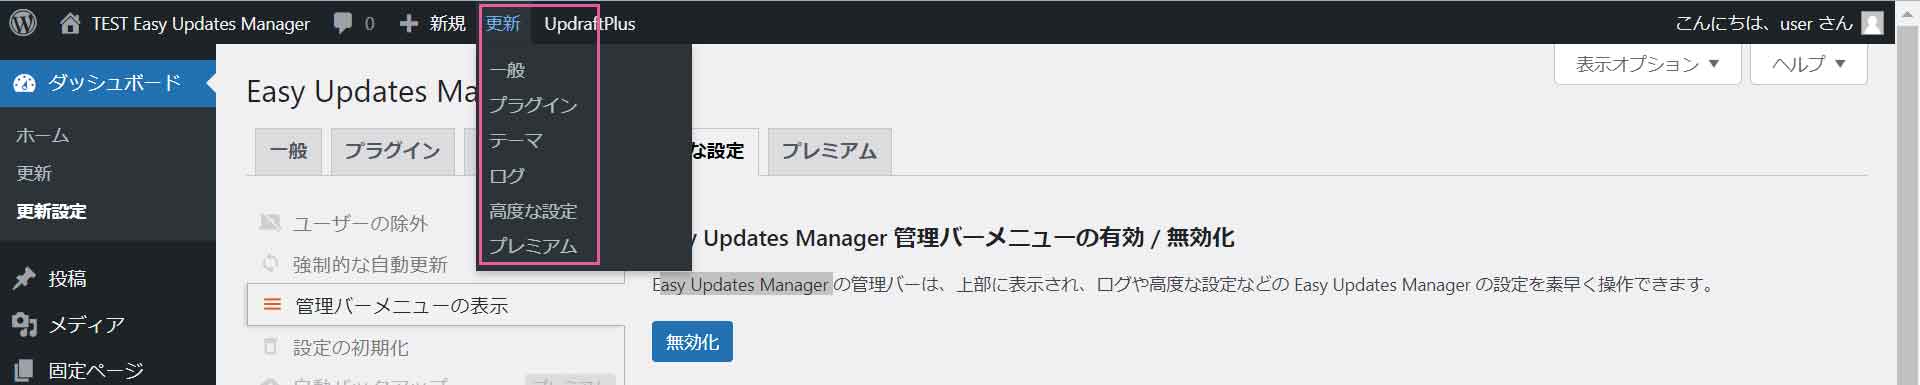 Easy Updates Manager 高度な設定 強制的な自動更新